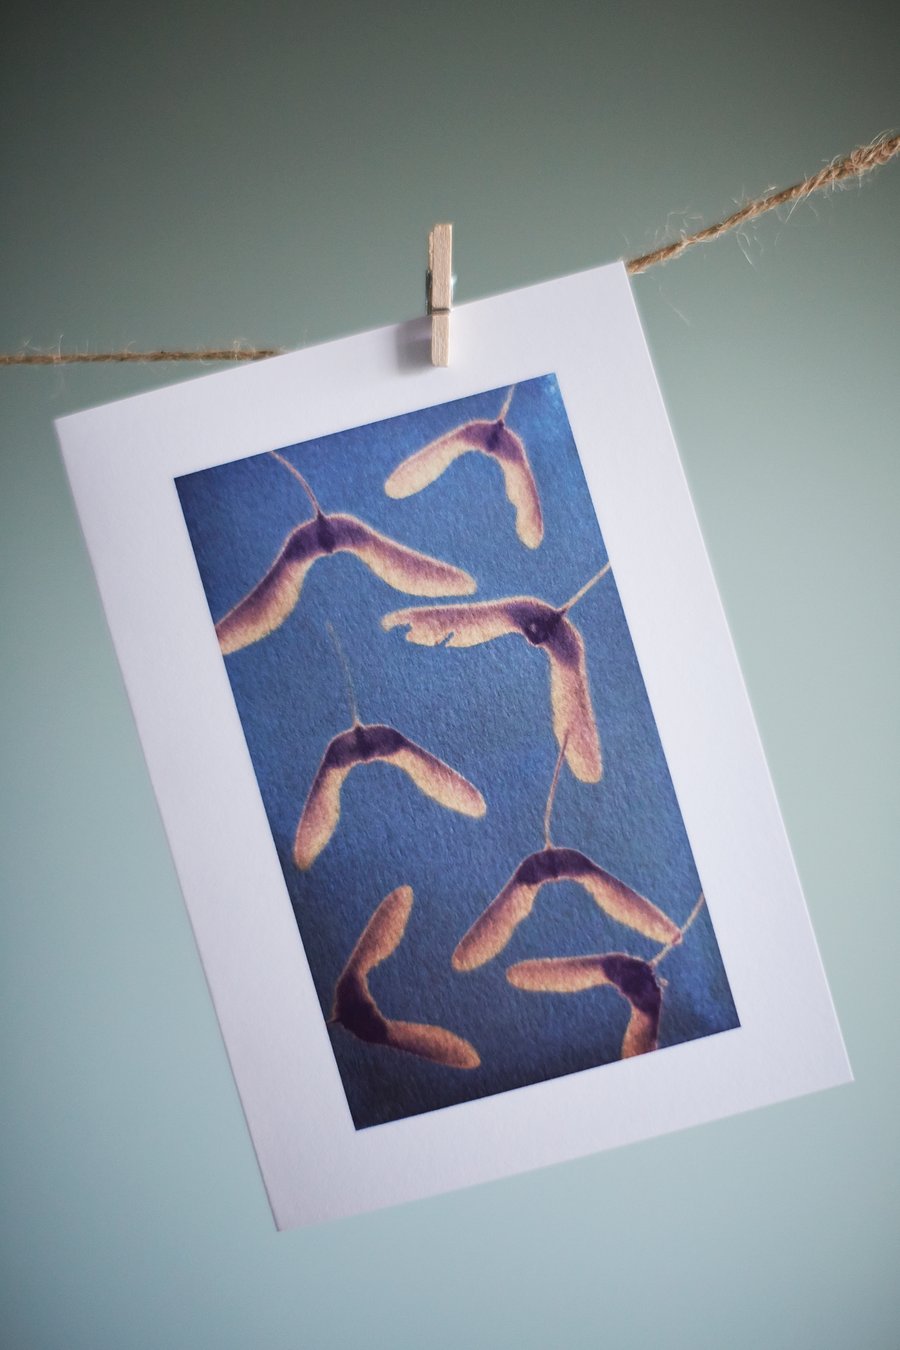 Sycamore seed card from original cyanotype